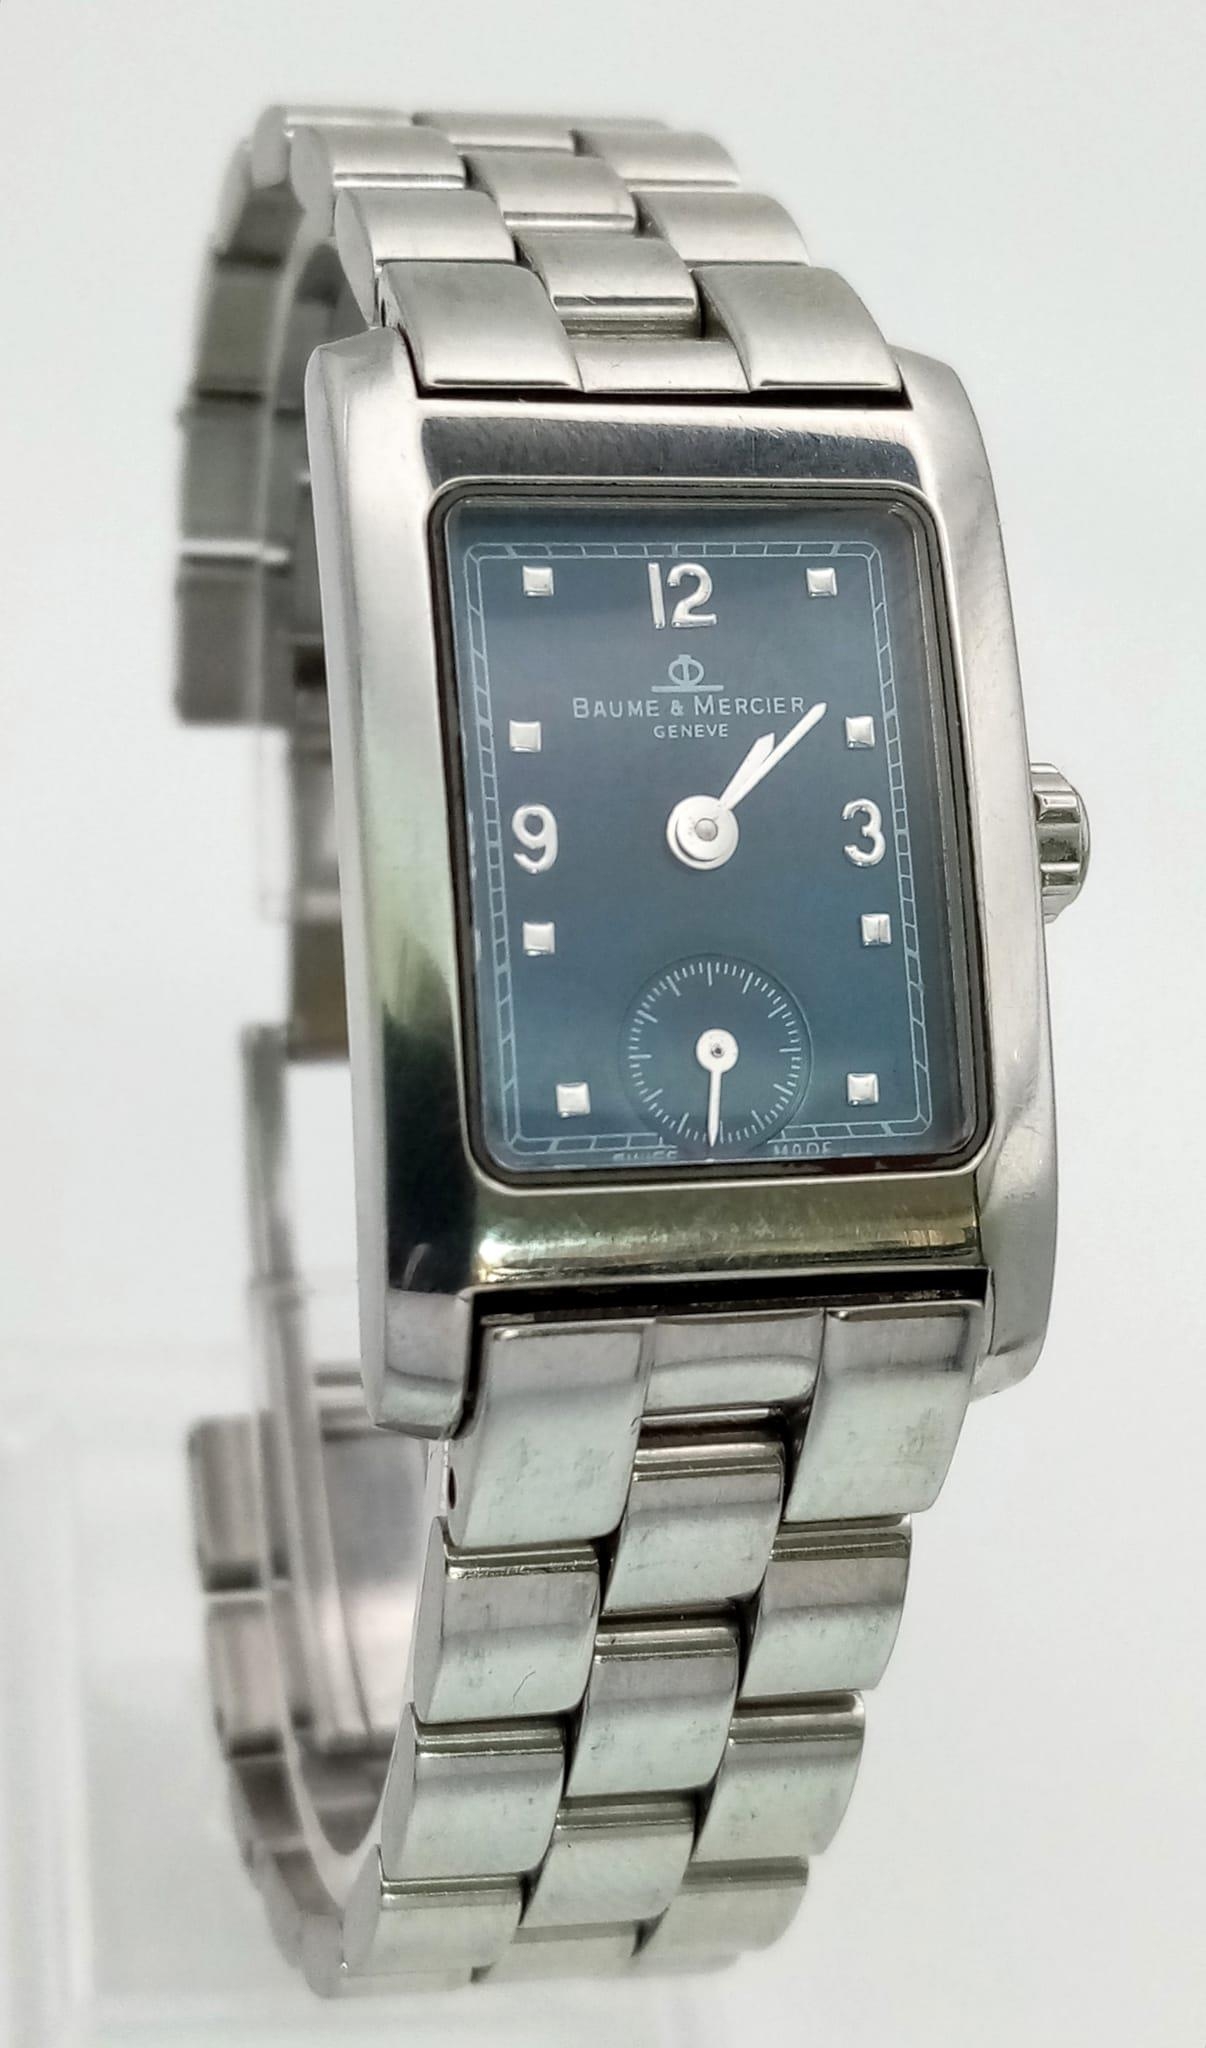 A Baume and Mercier Quartz Ladies Watch. Stainless steel strap and case - 20mm. Ice blue dial with